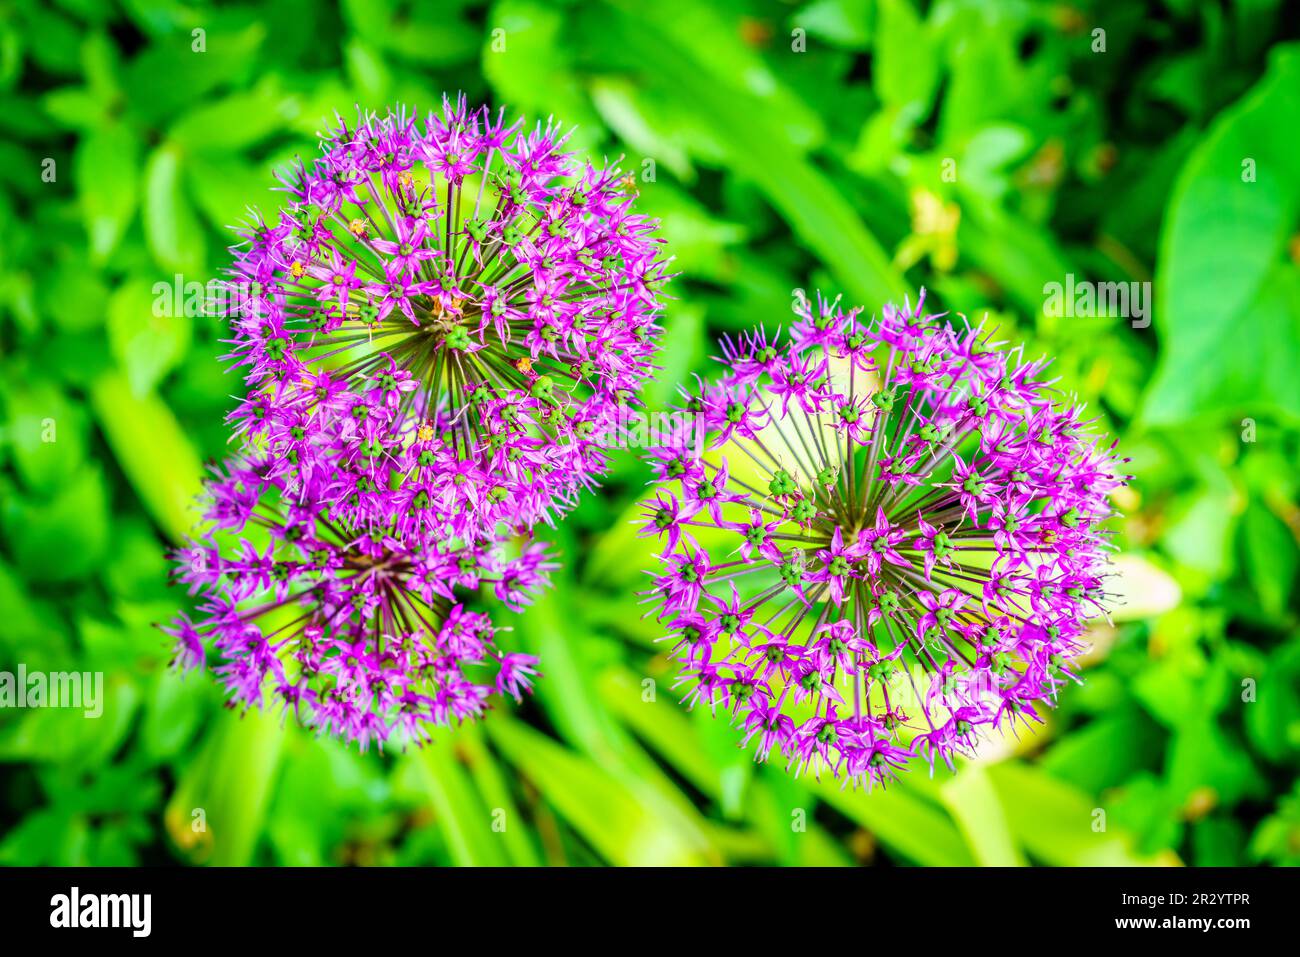 Close-up image of the Star of Persia flowers (Allium christophii) against blurred greenery background Stock Photo